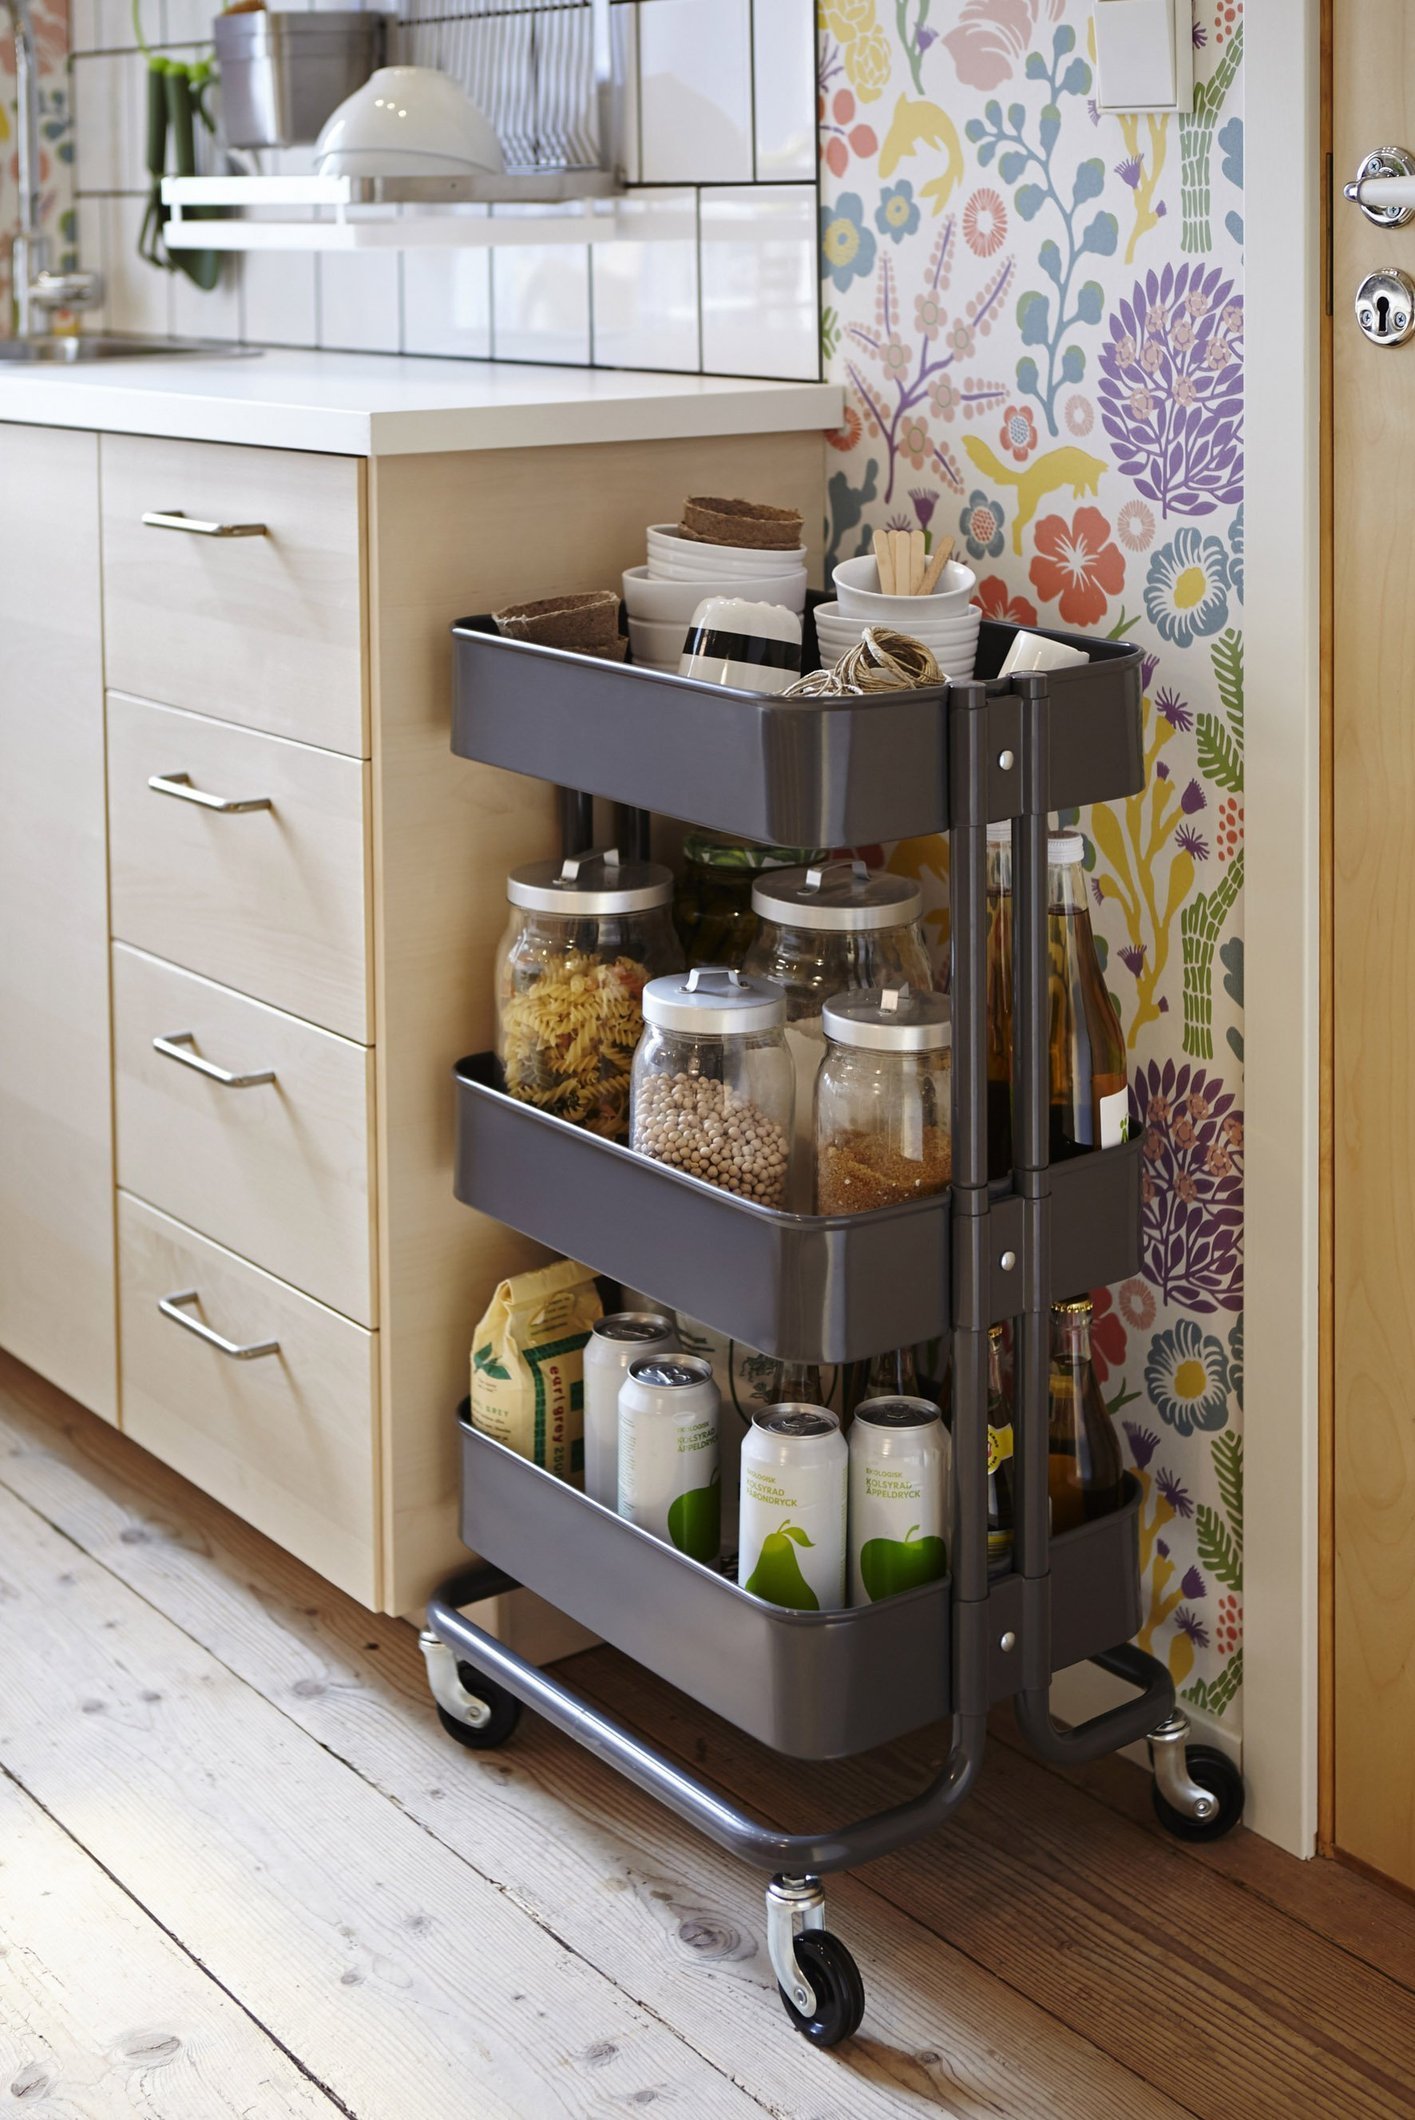 6 Clever IKEA Storage Solutions for Your Kitchen